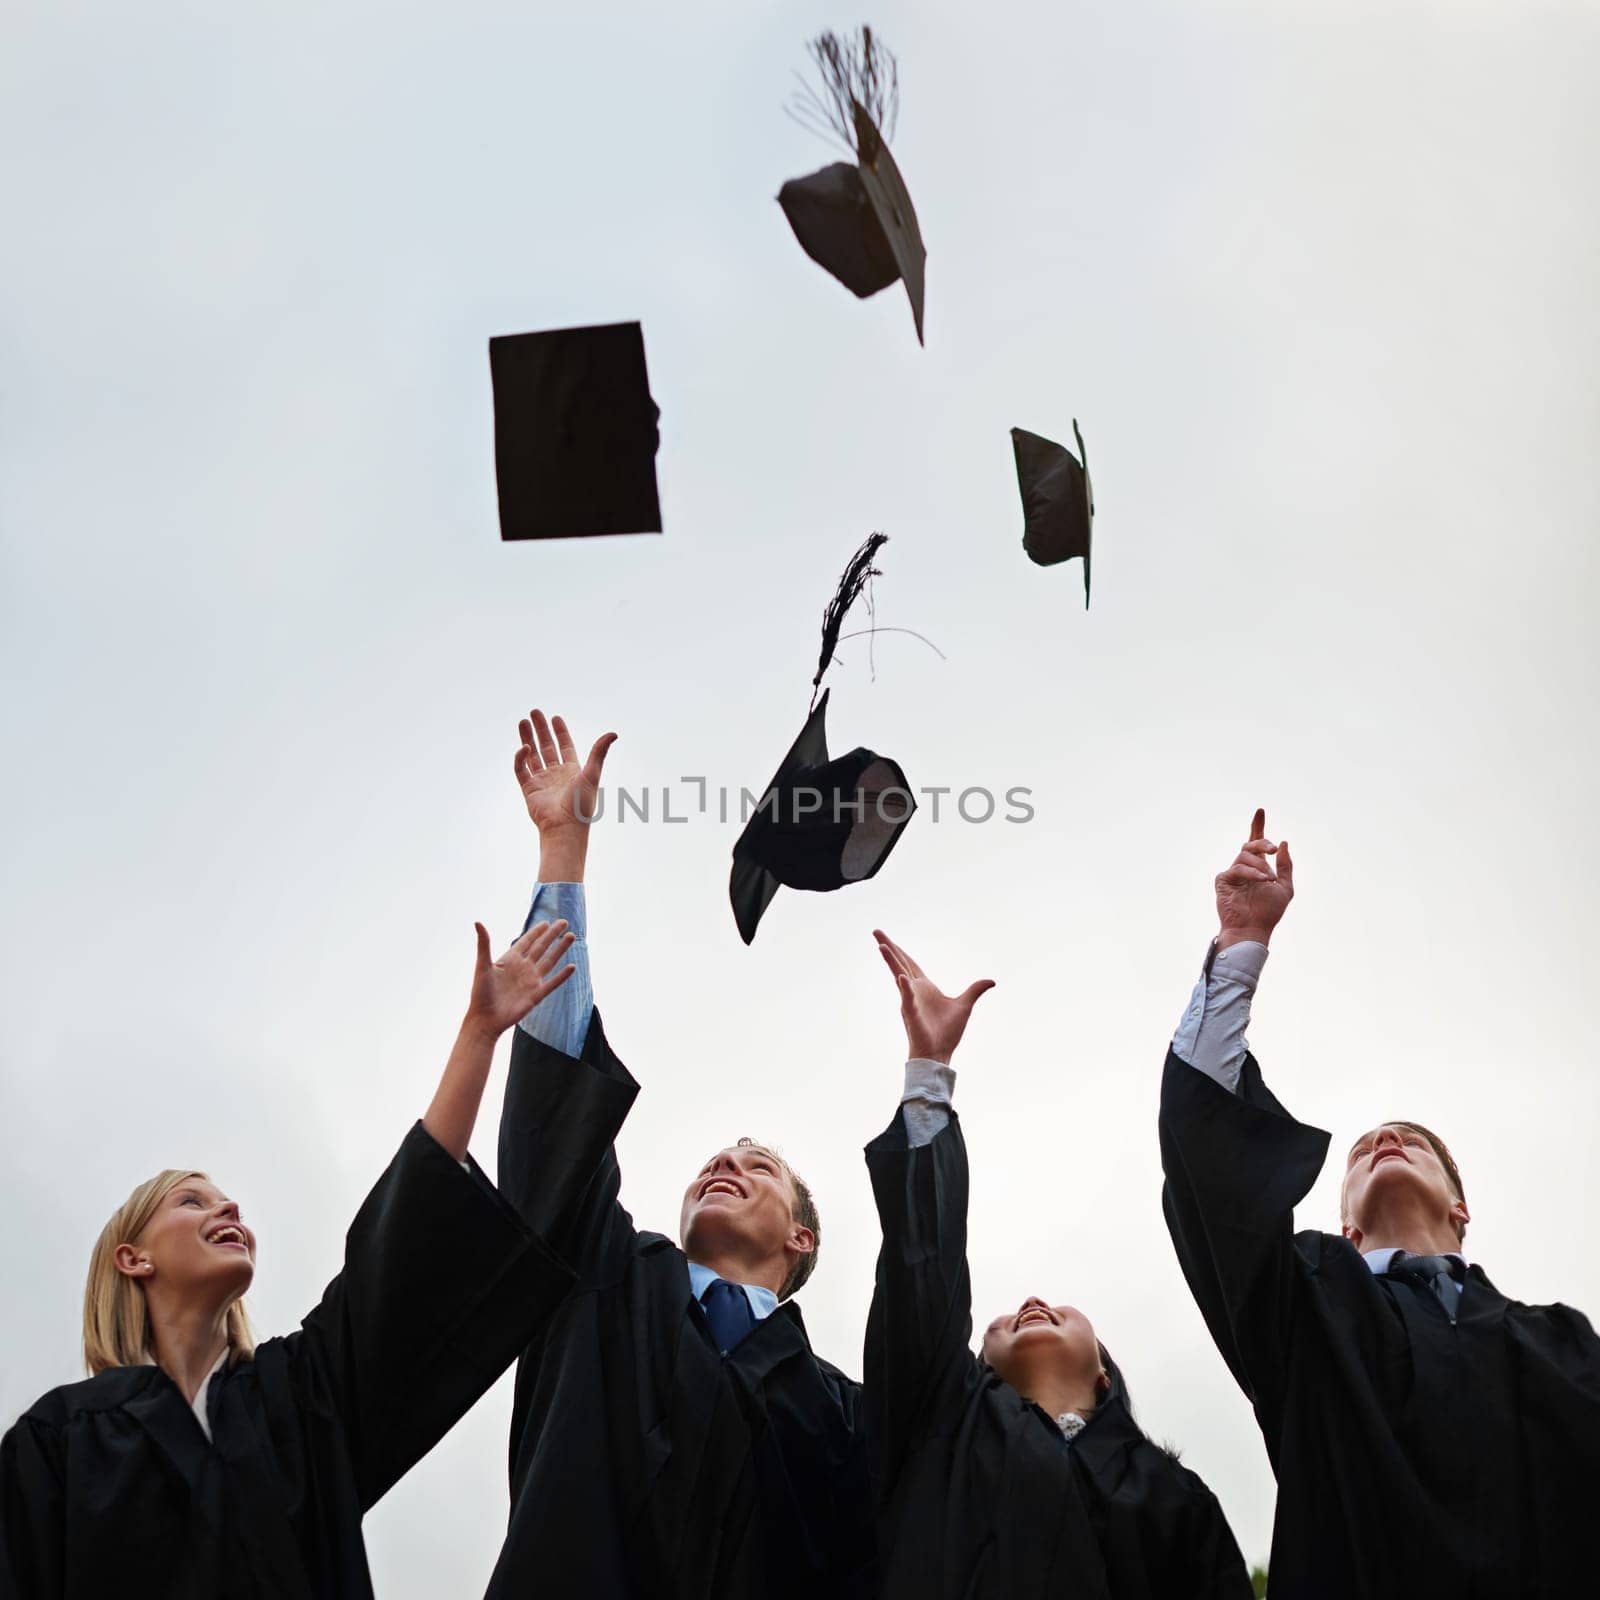 We did it. A group of students throwing their caps into the air after graduation